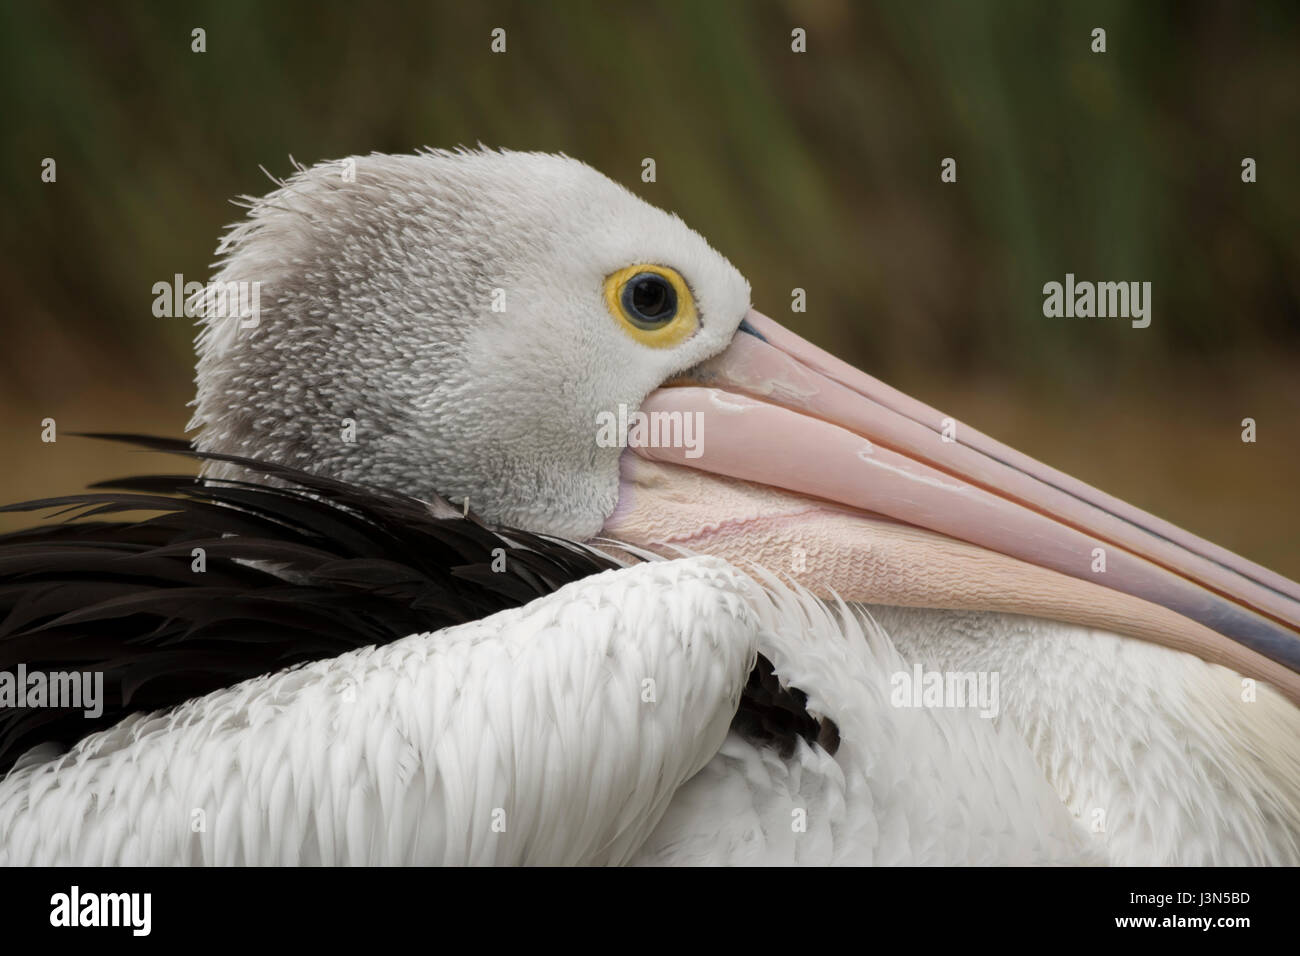 Resting pelican close up image cropped in tight showing the upper body and mid section of the bird with focus on the eye. Stock Photo